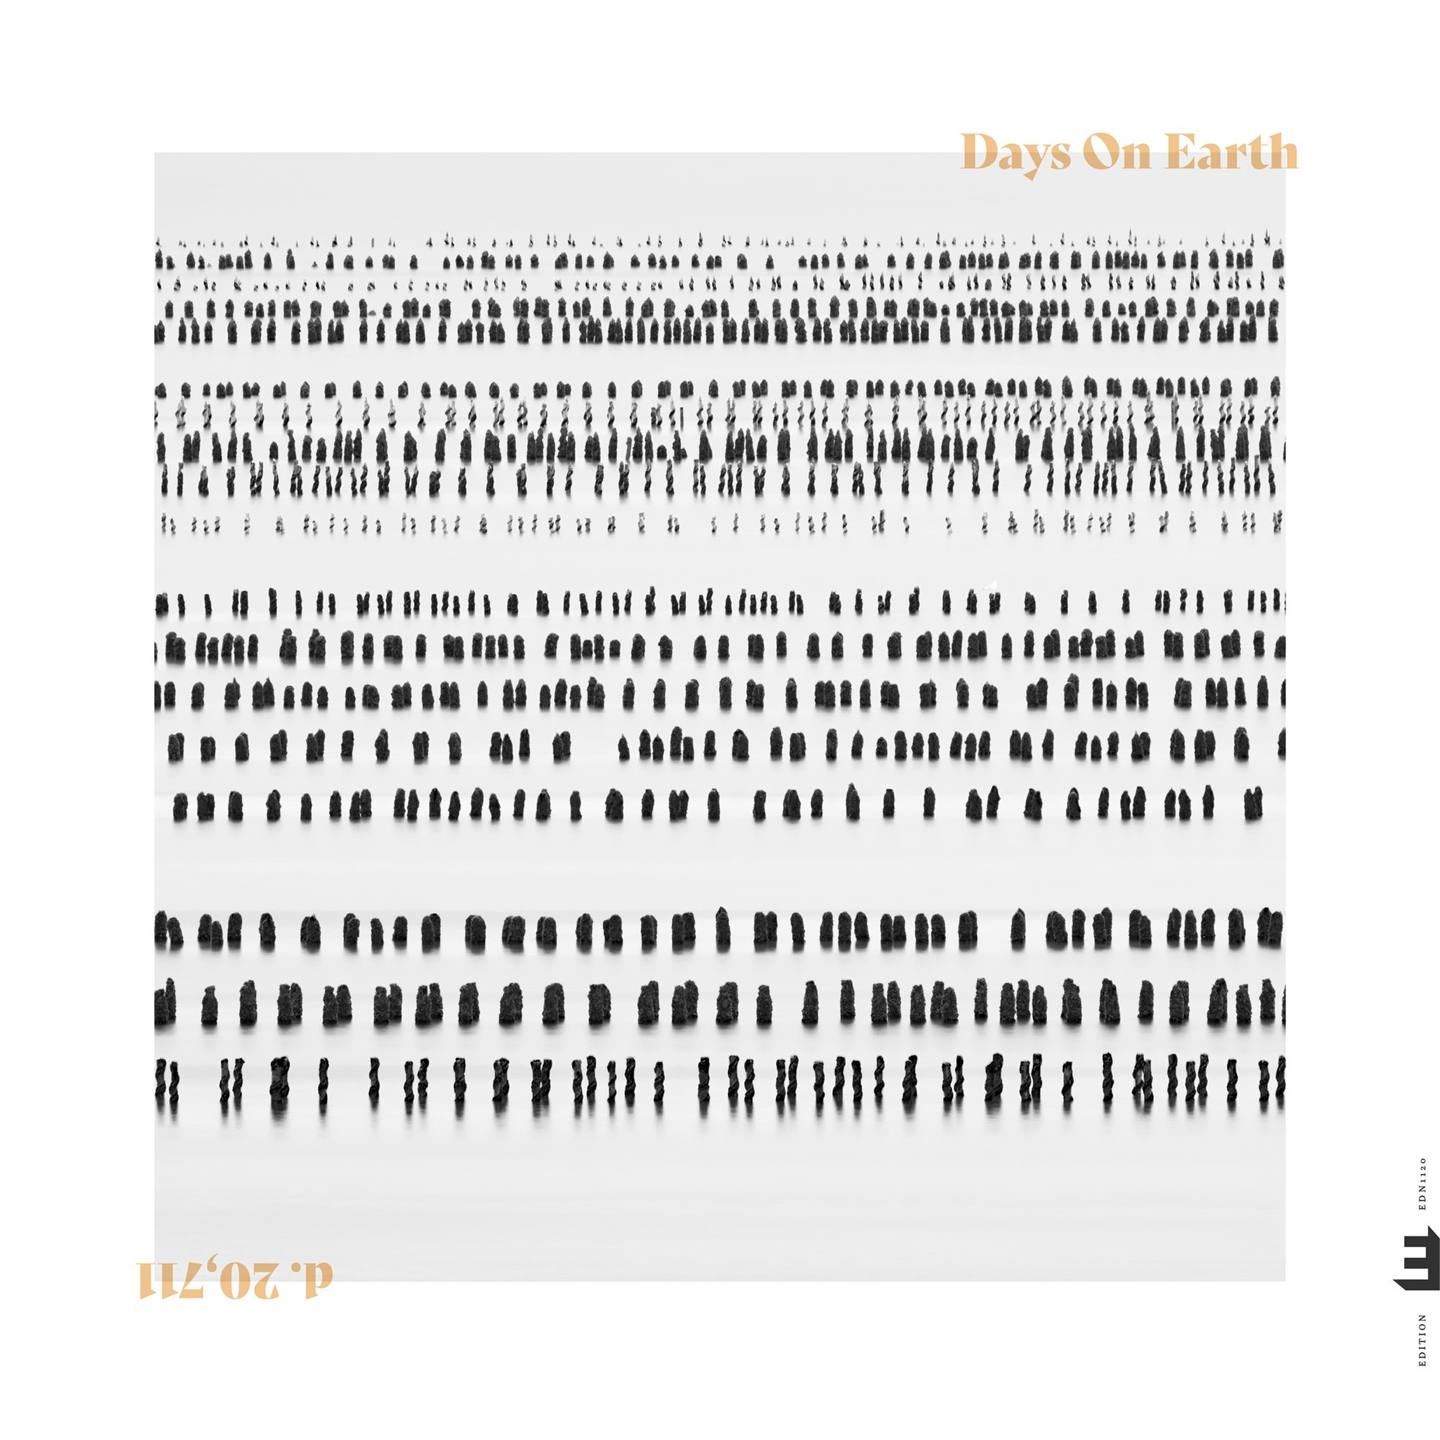 DAYS ON EARTH